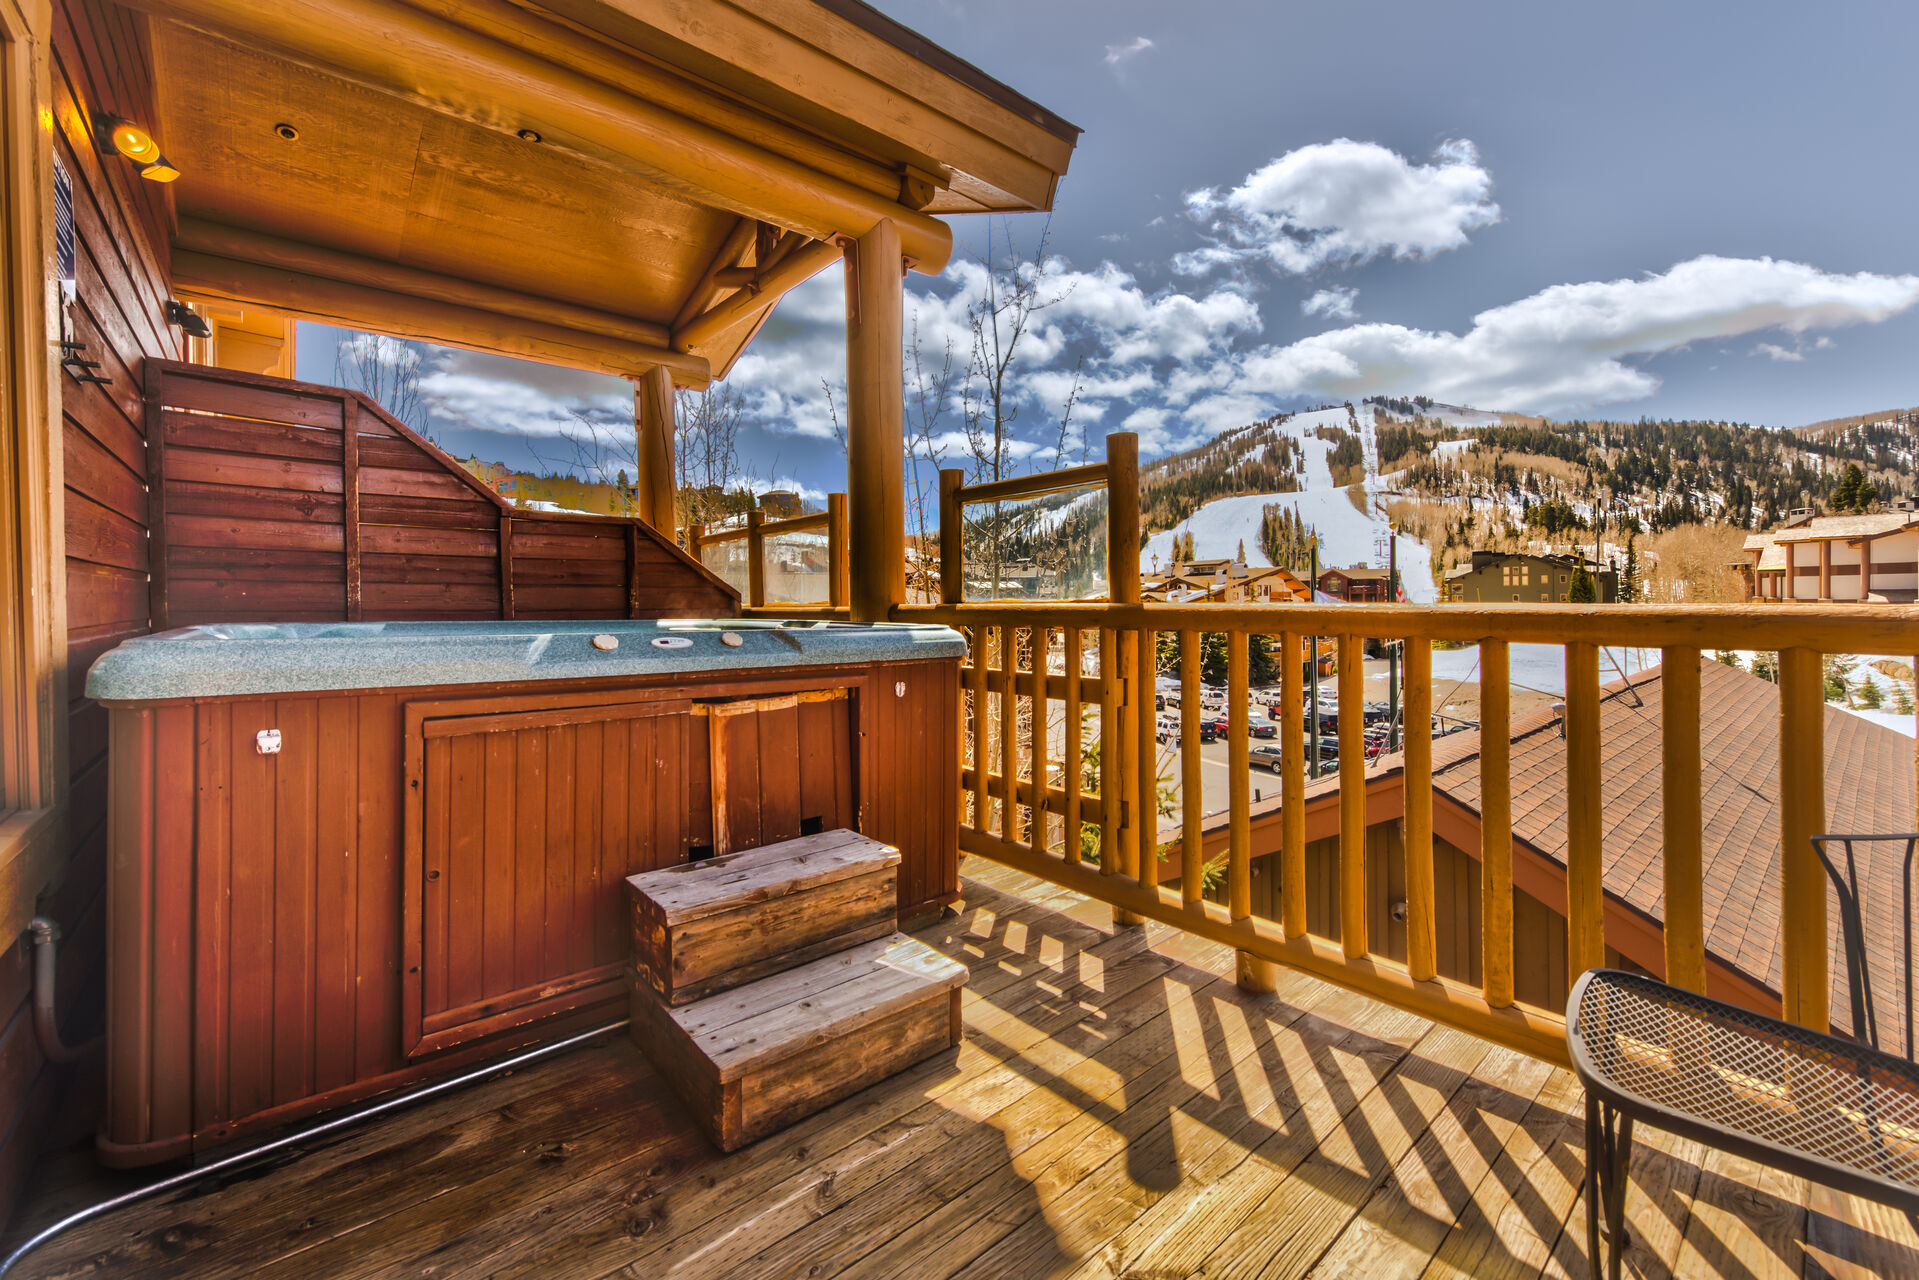 Private Hot Tub with Fabulous Views of Deer Valley Resort